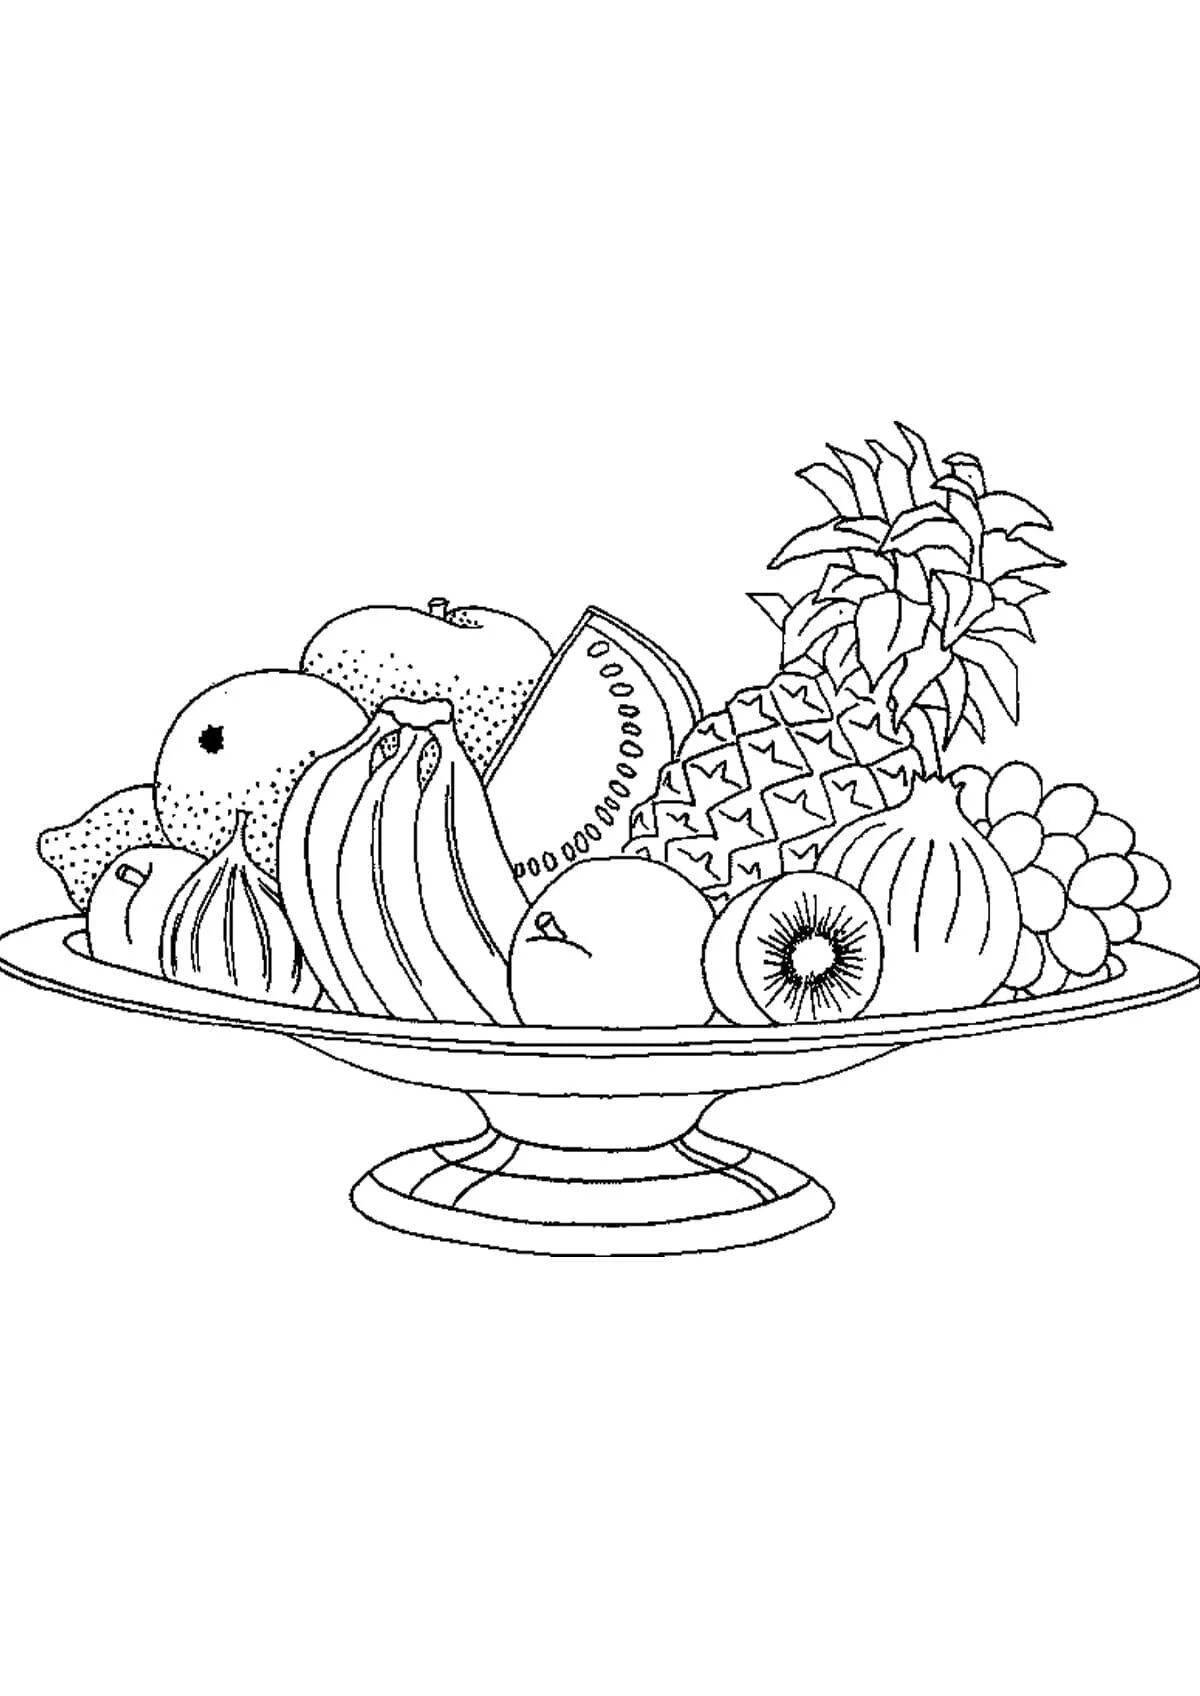 Fun fruit plate coloring book for kids